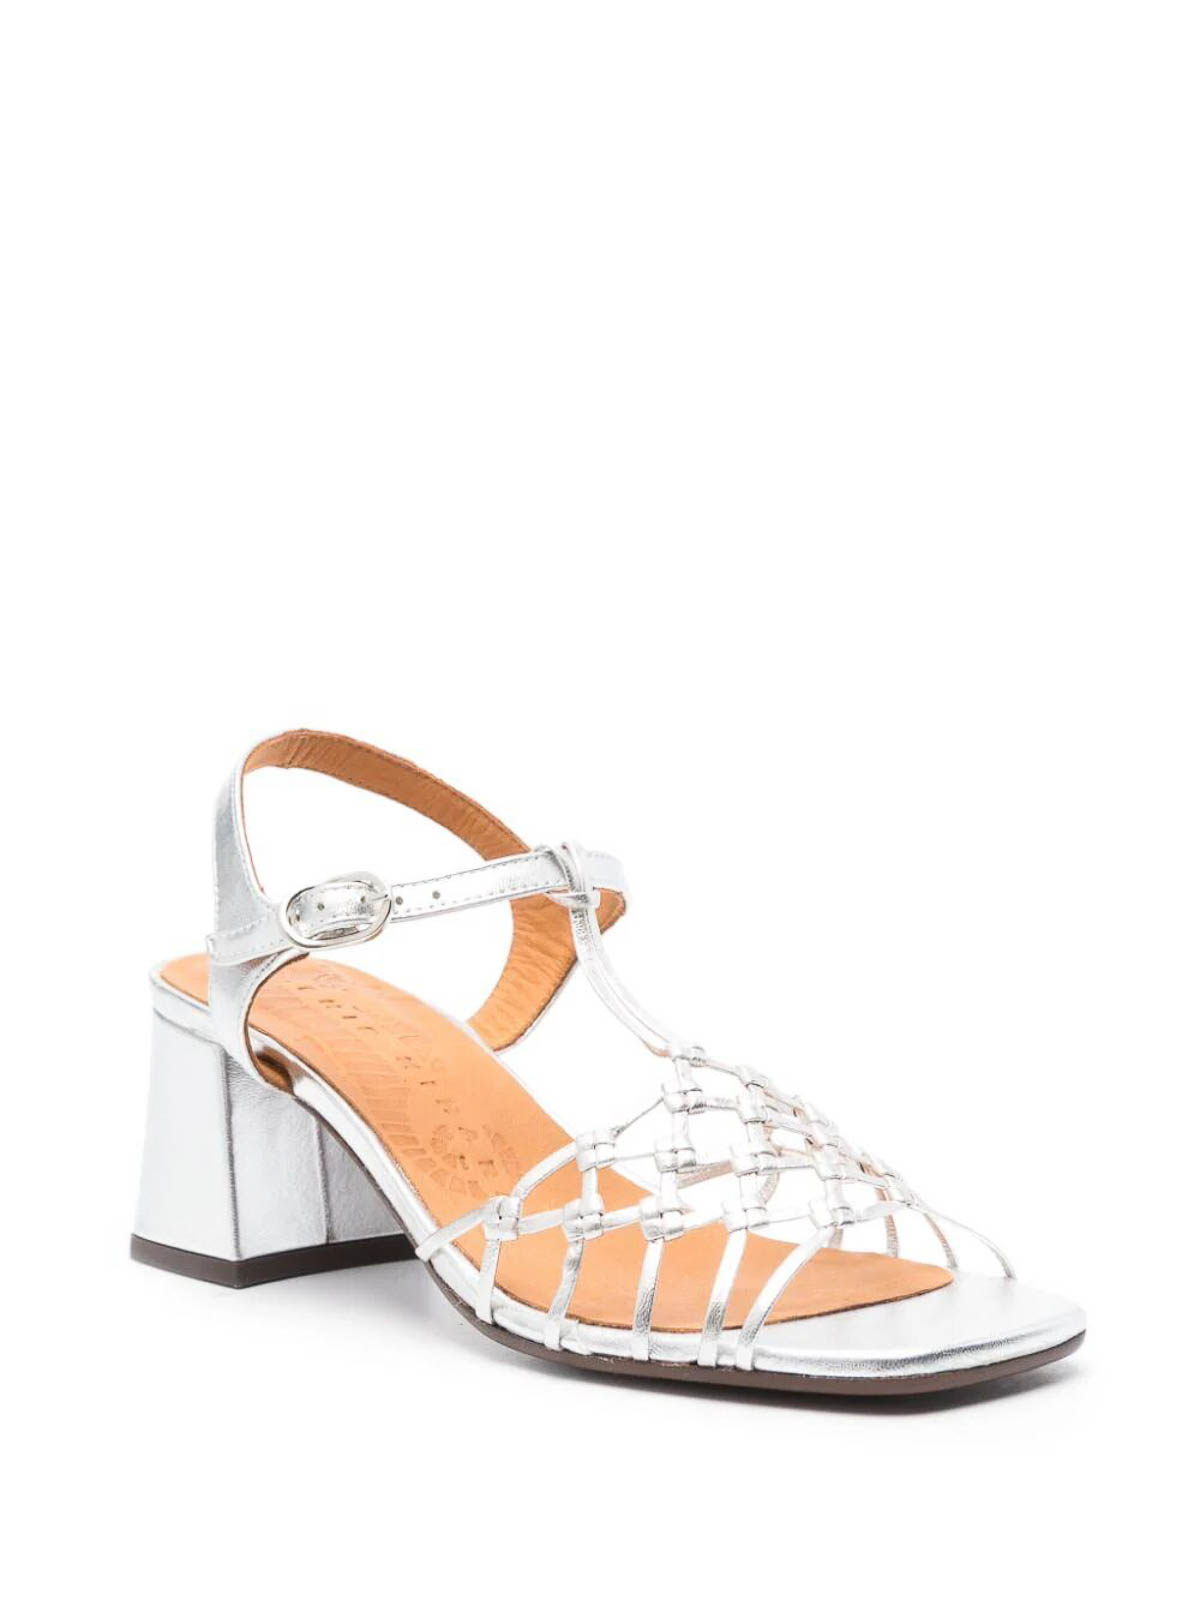 Shop Chie Mihara Silver Sandals